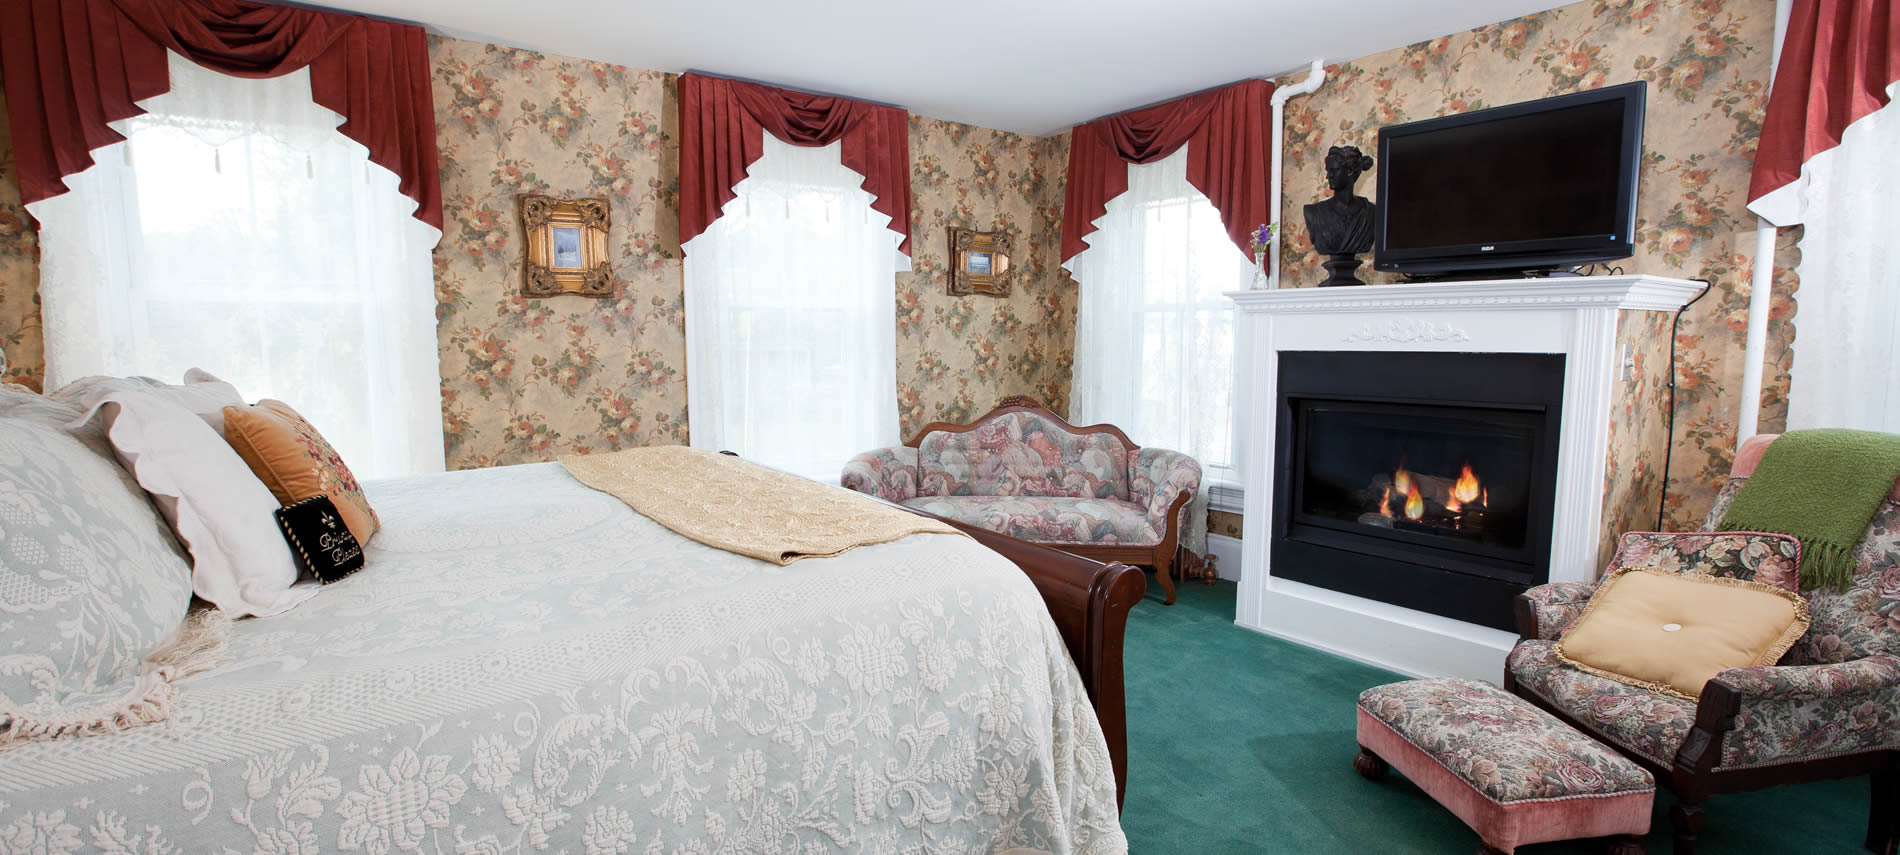 Princess Alice guest room, floral wallpaper, teal green carpet, fireplace, TV, upholstered furniture and several windows